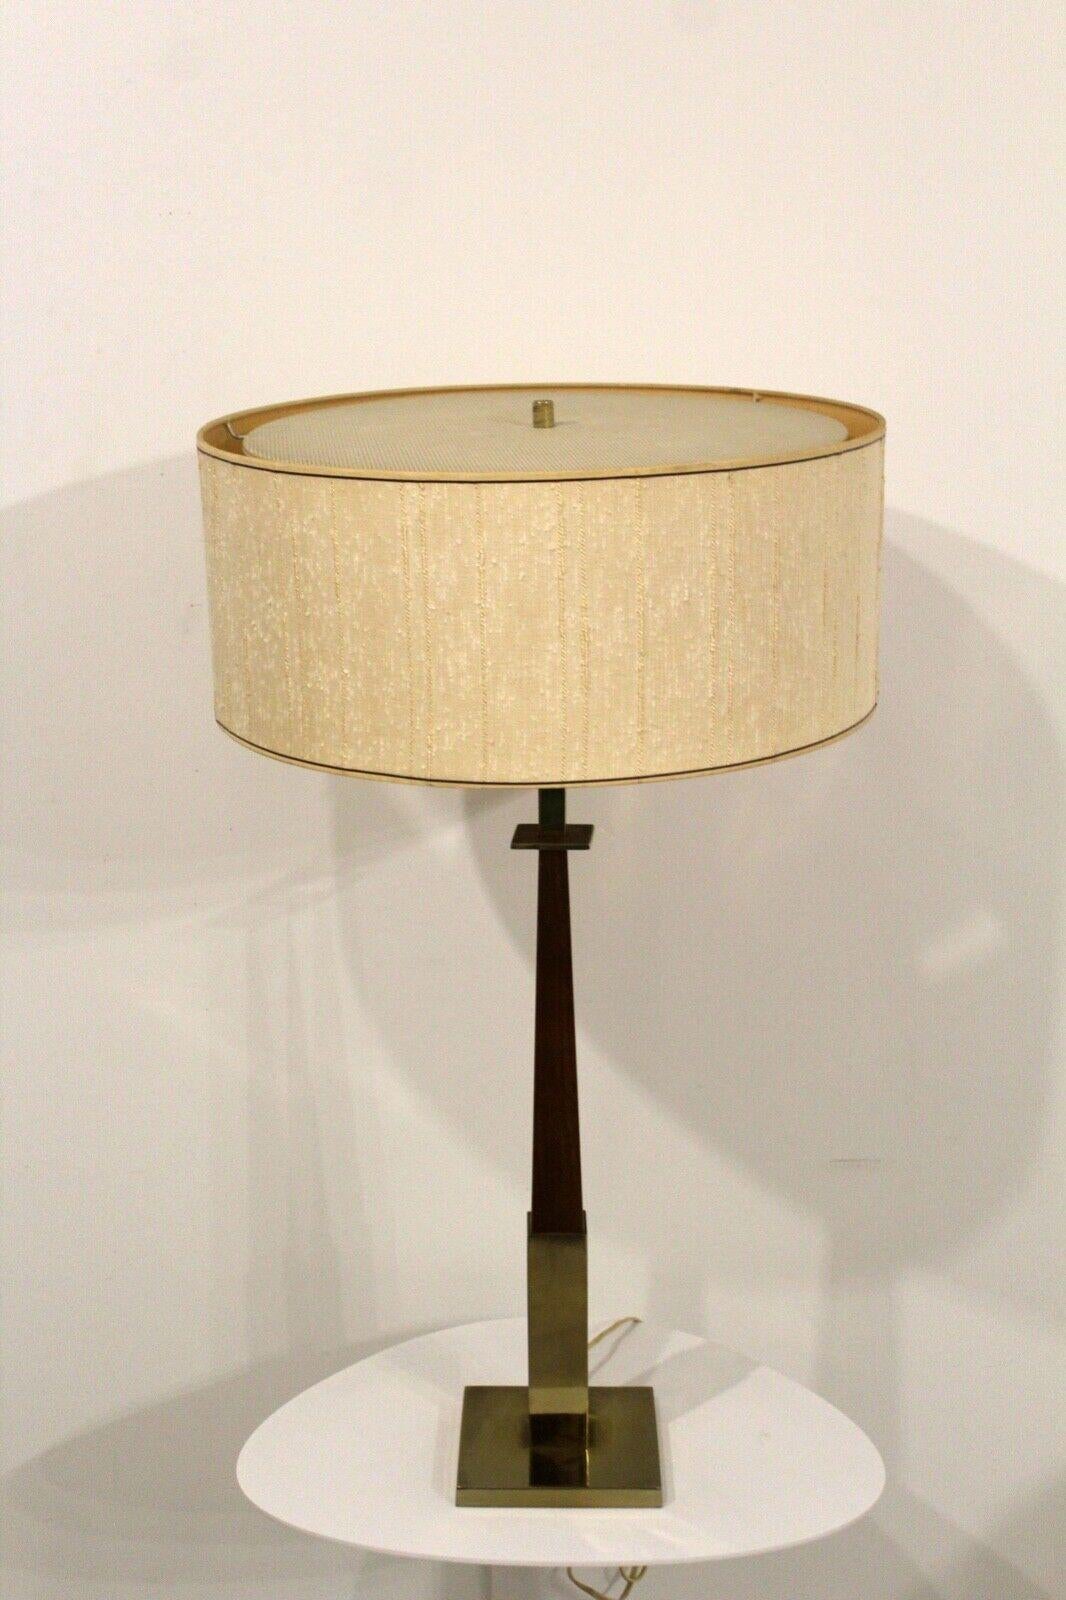 For your consideration is this vintage Gerald Thurston for Lightolier brass & walnut table lamp with the original shade. Dimensions: 18 diameter x 30.5 height.
 